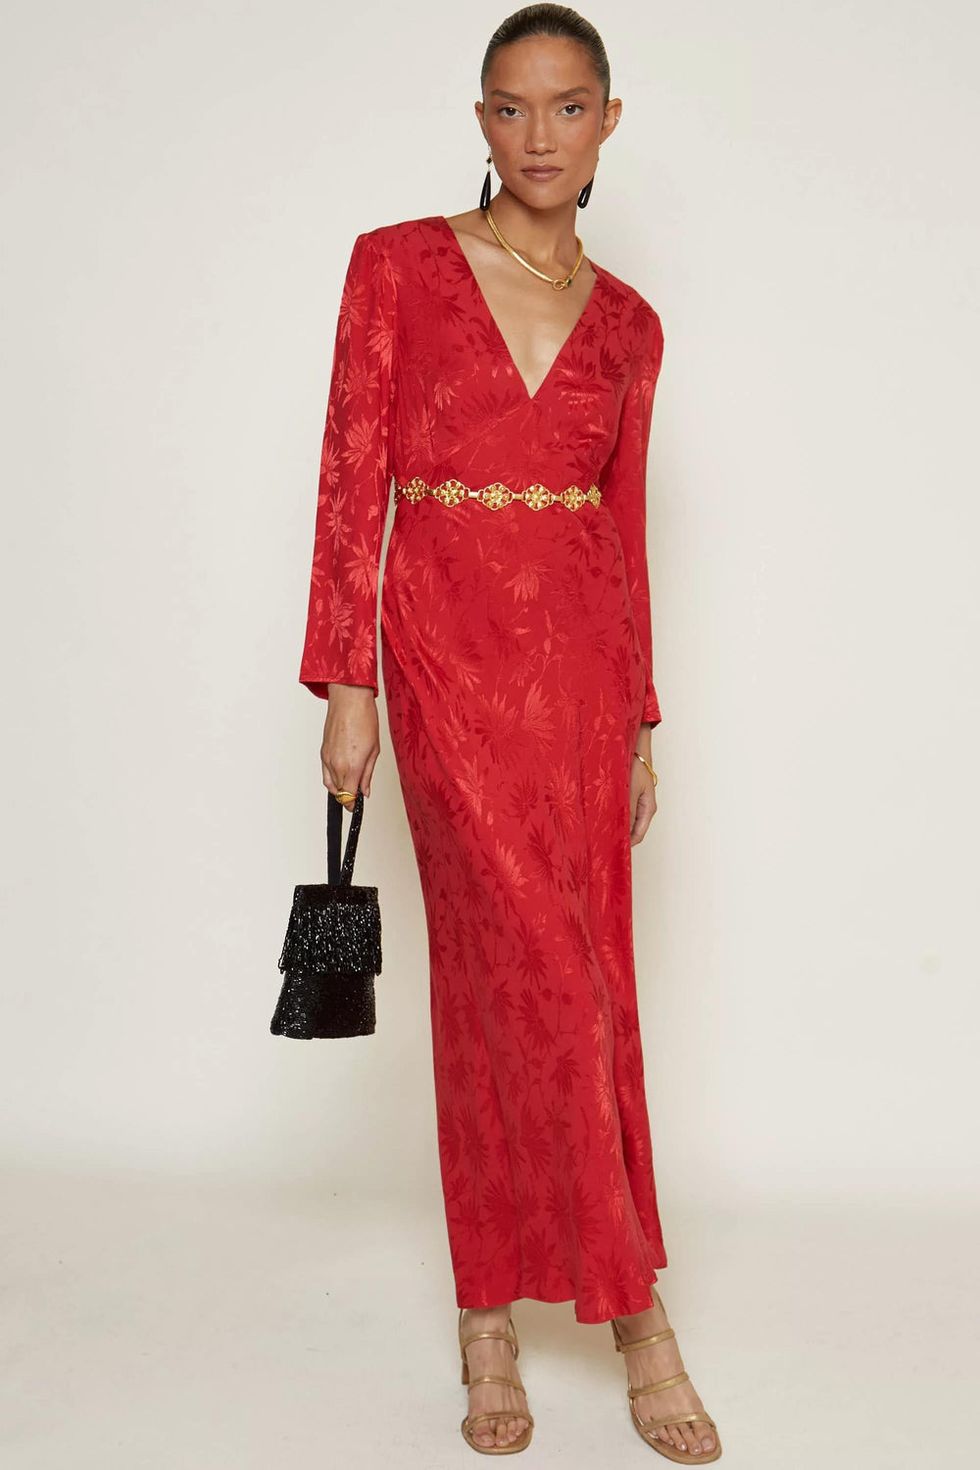 Rixo sale: party season dresses are 50% off for Boxing Day